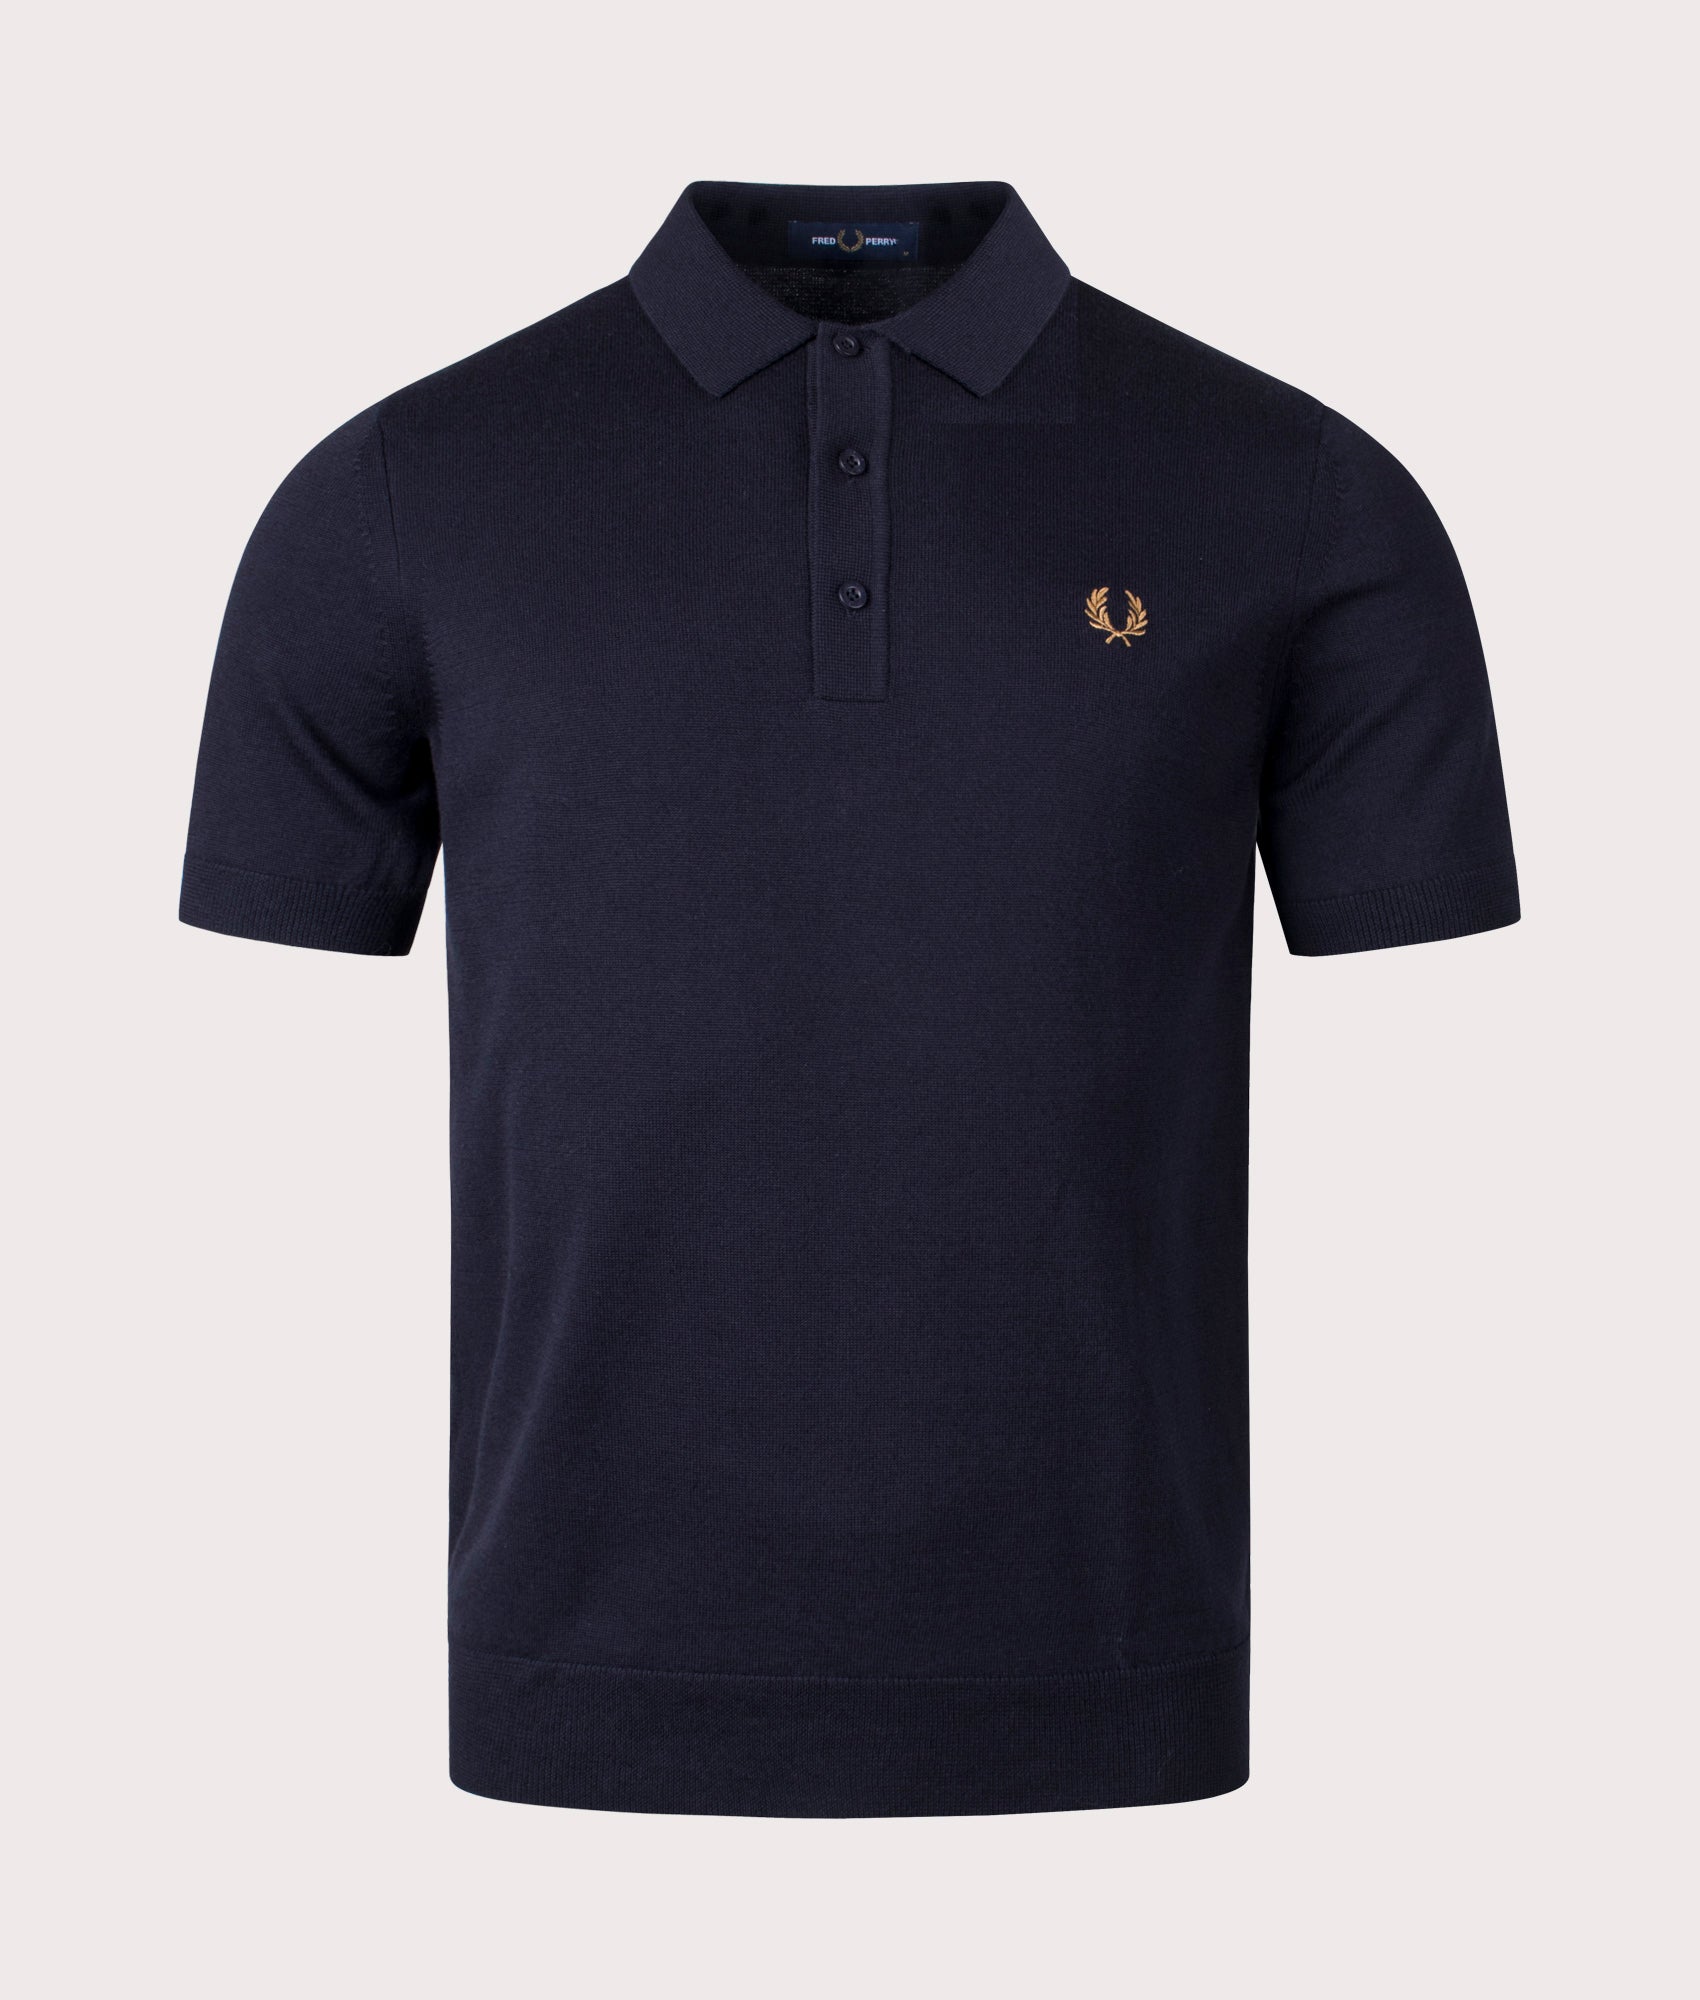 Fred Perry Mens Classic Knitted Polo Shirt - Colour: 795 Navy - Size: Medium